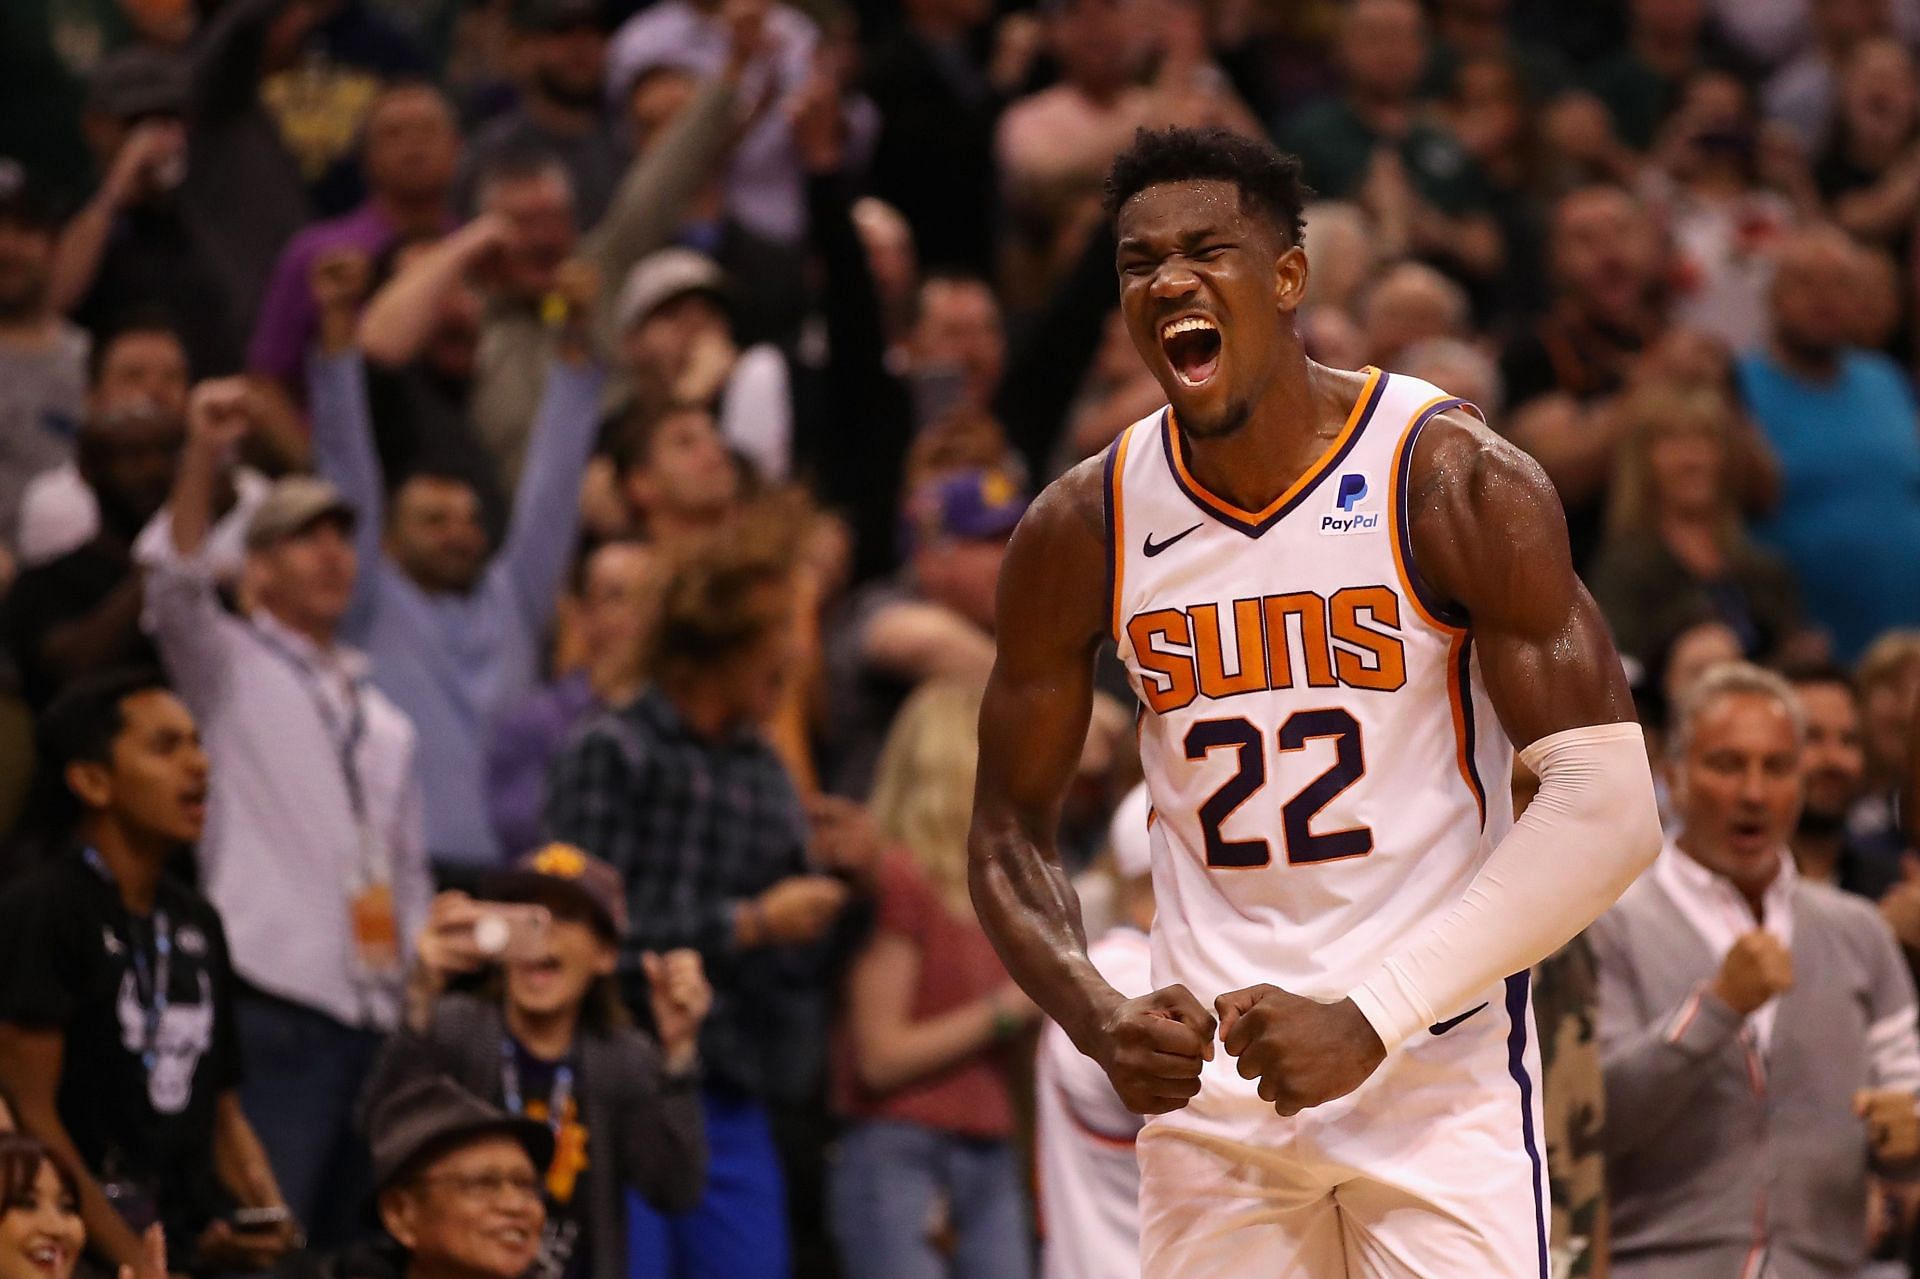 DeAndre Ayton of the Phoenix Suns is one of the best big men in the NBA today.